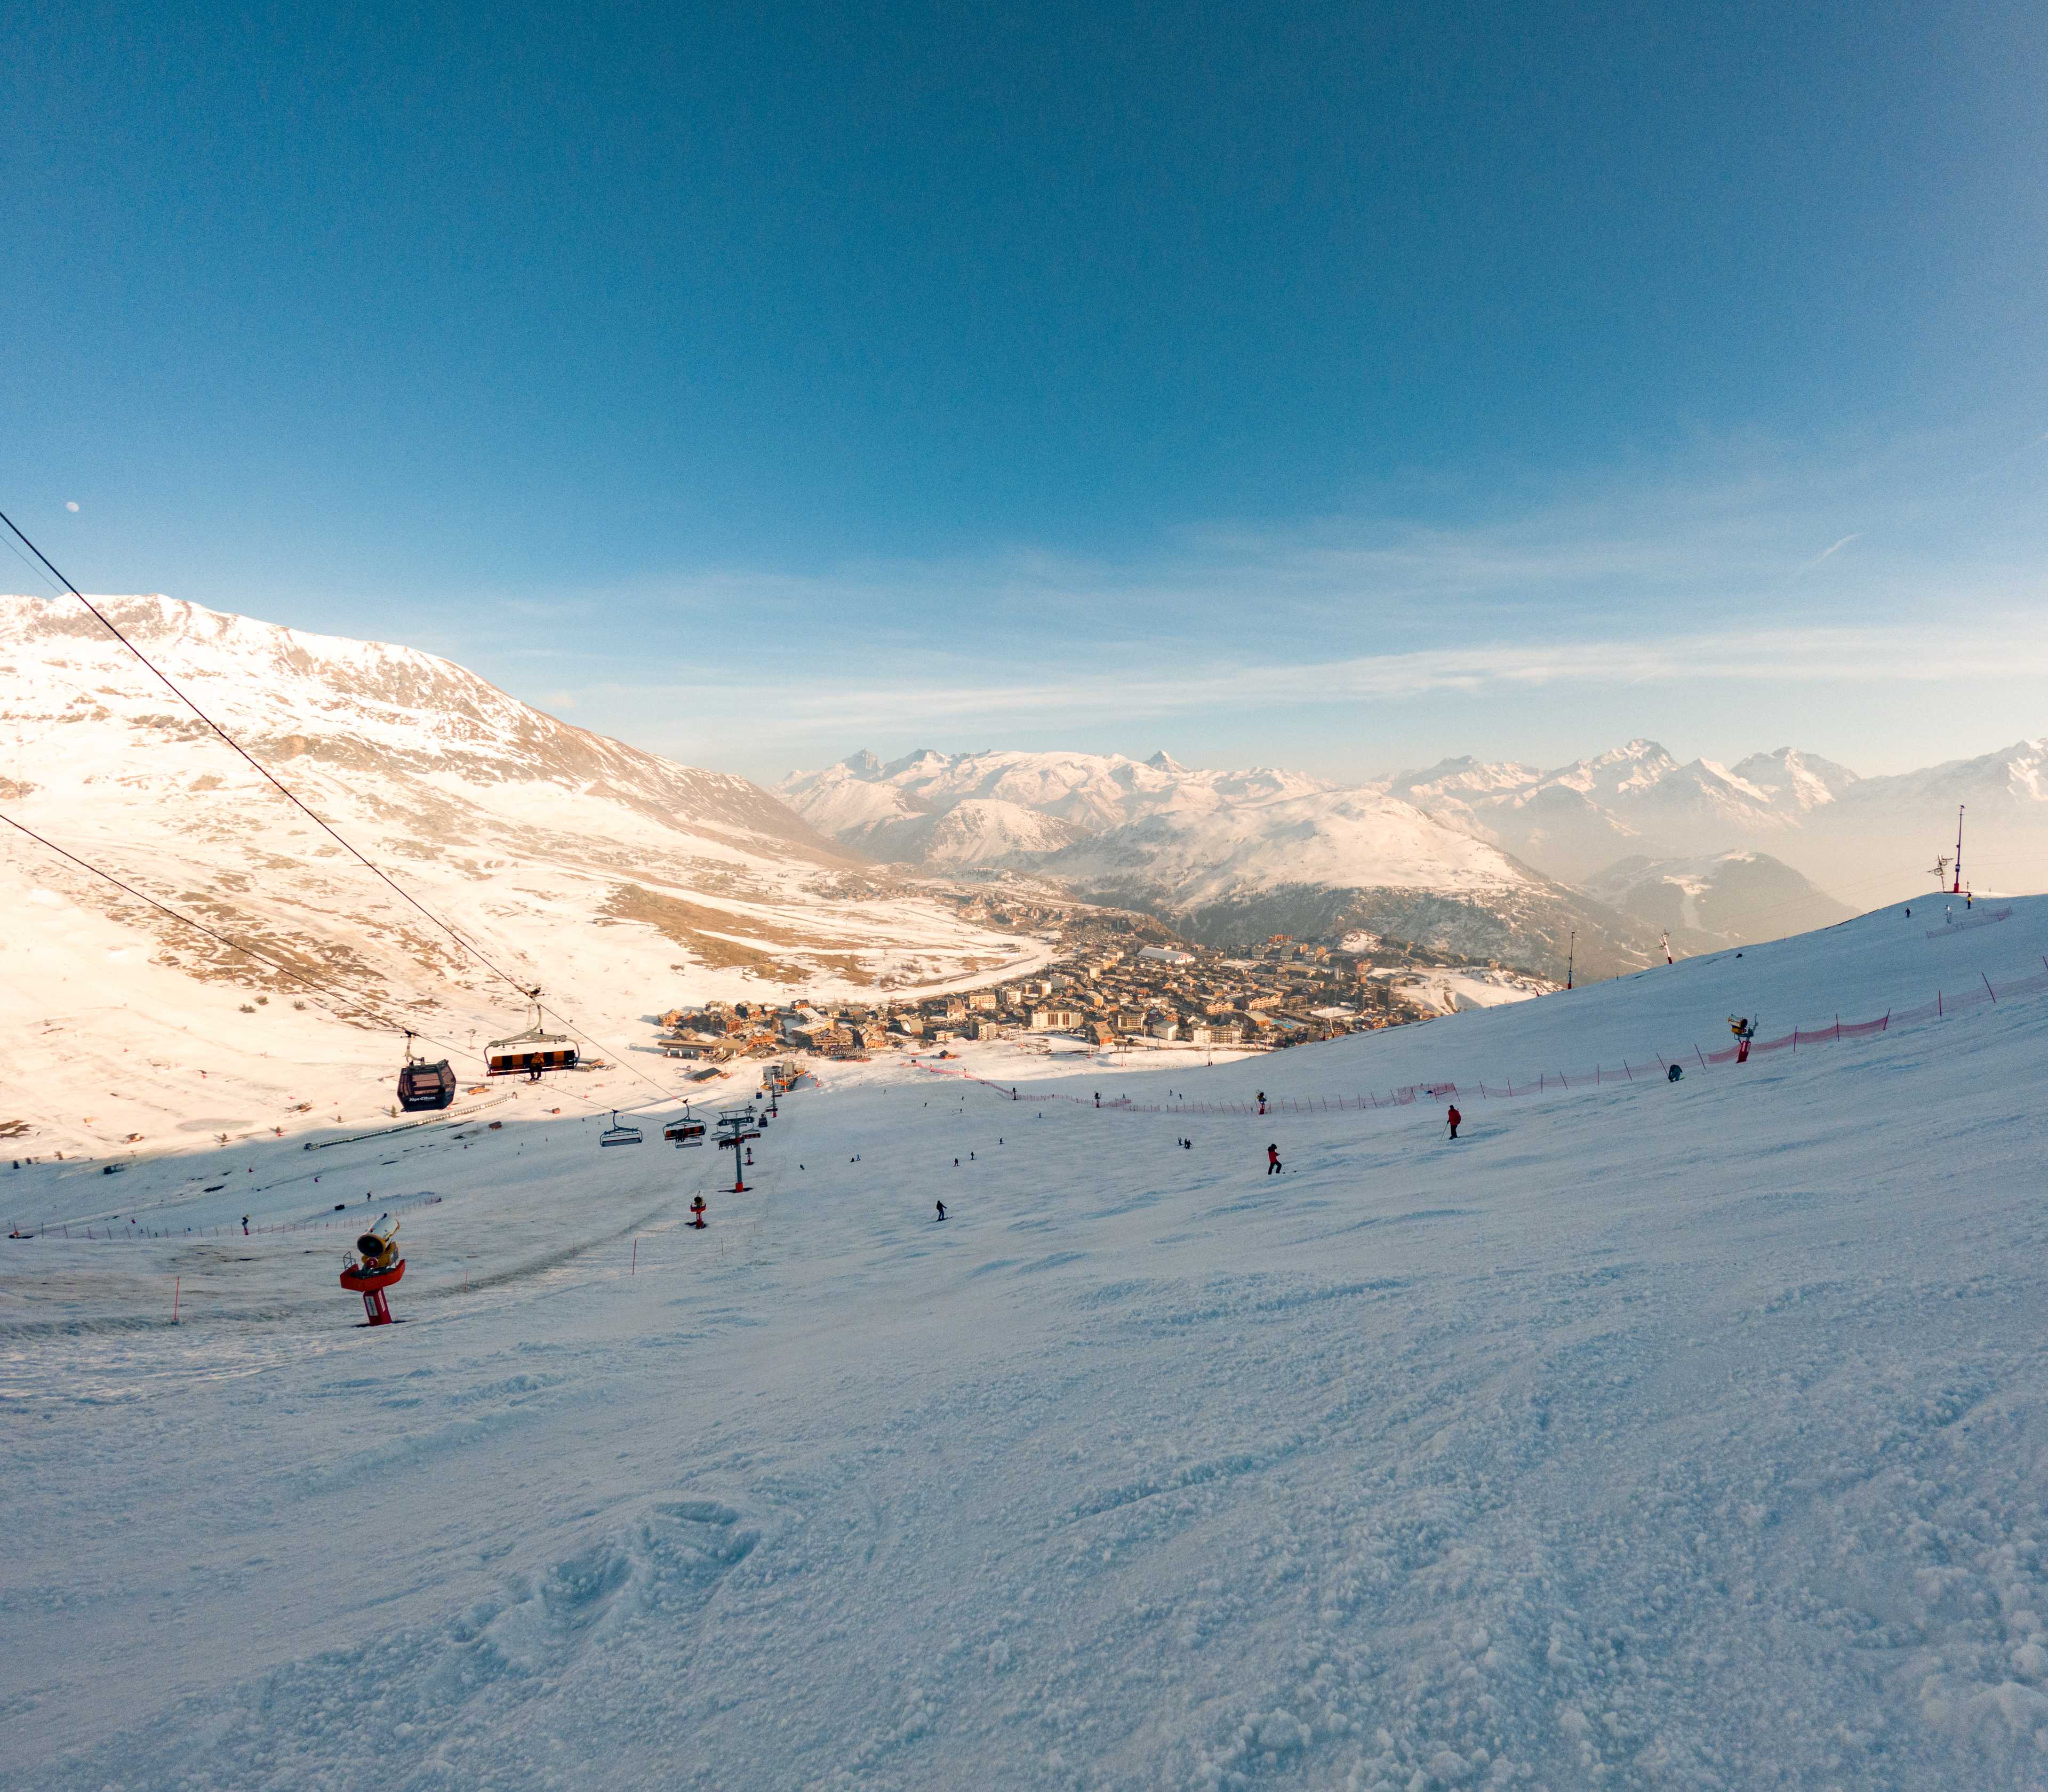 The view from Signal (2100 m a.s.l.), Alpe d'Huez